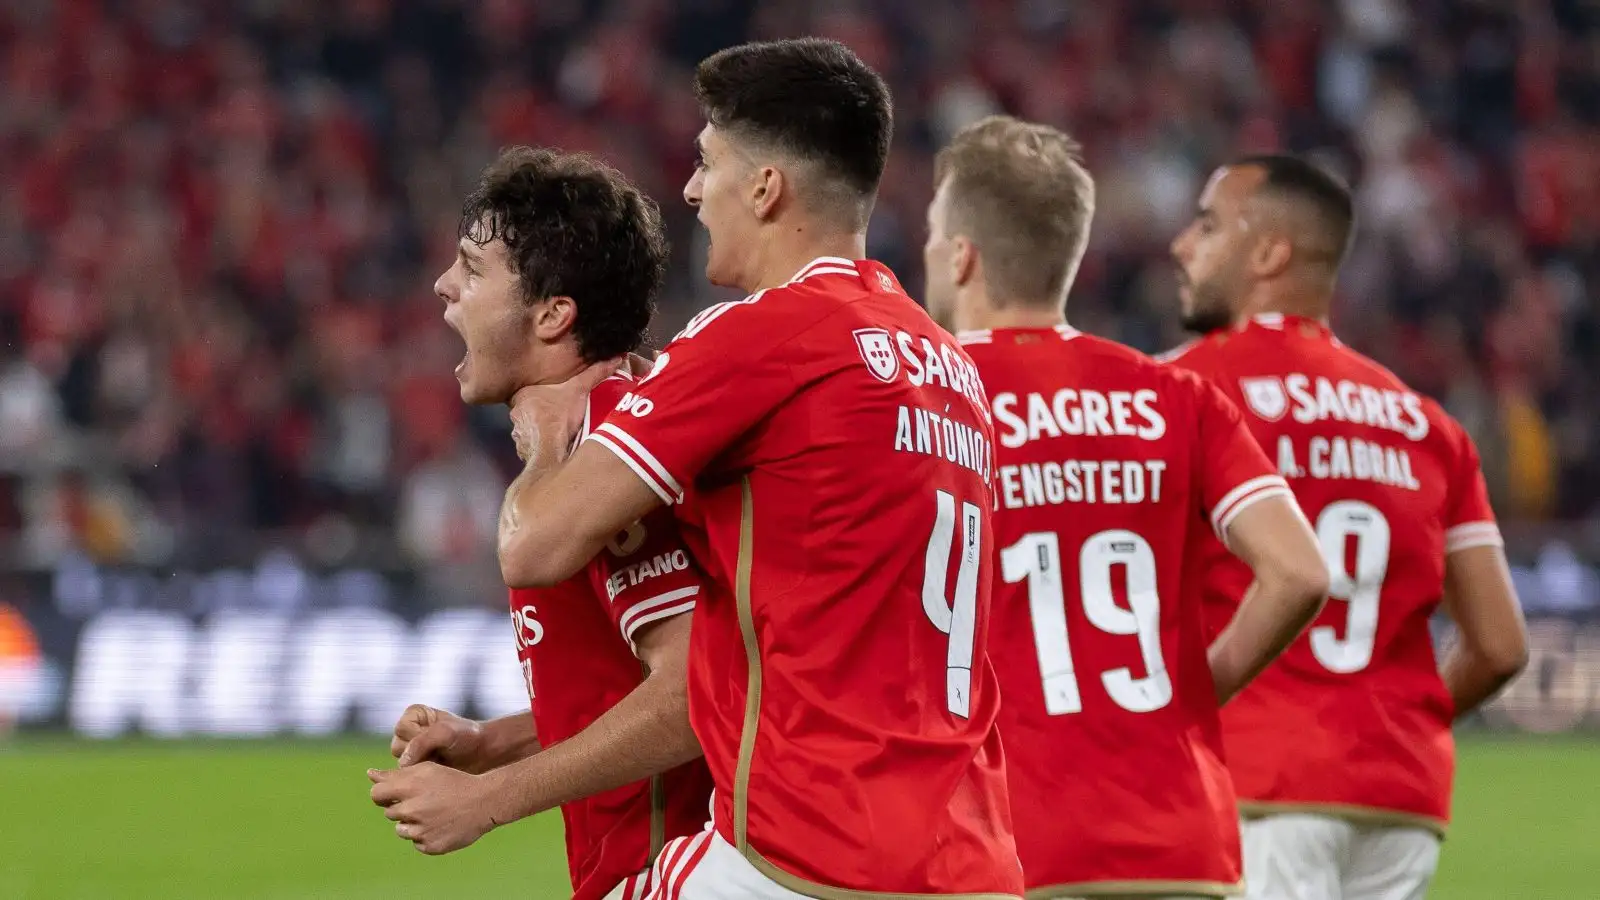 Benfica teenager Joao Neves memorializes his urge against Sporting.